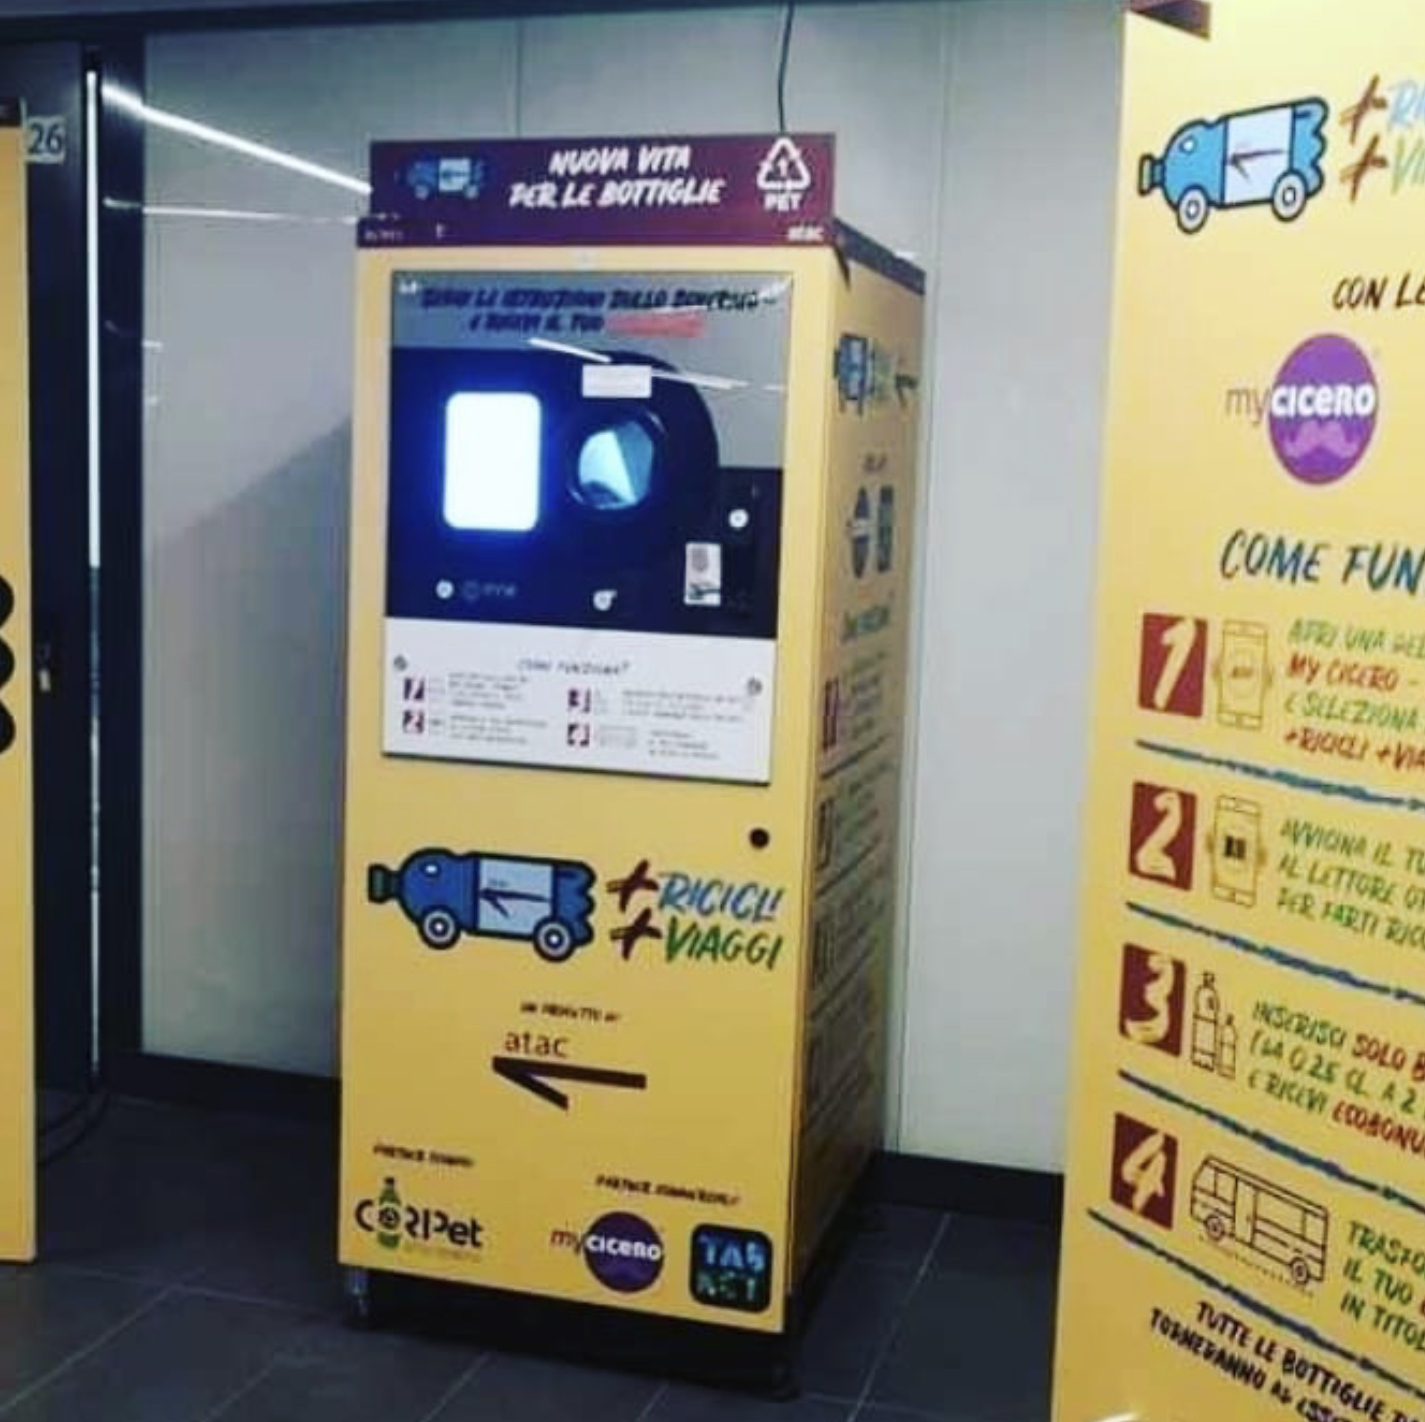 Holiday tip: a FREE metro trip in Rome! Just save 30 bottles from ending up as litter and your metro trip is free! @thelocalitaly #reducerecyclerefresh #reducewaste #reduceplasticwaste #recyclerenkunjeincentiveren